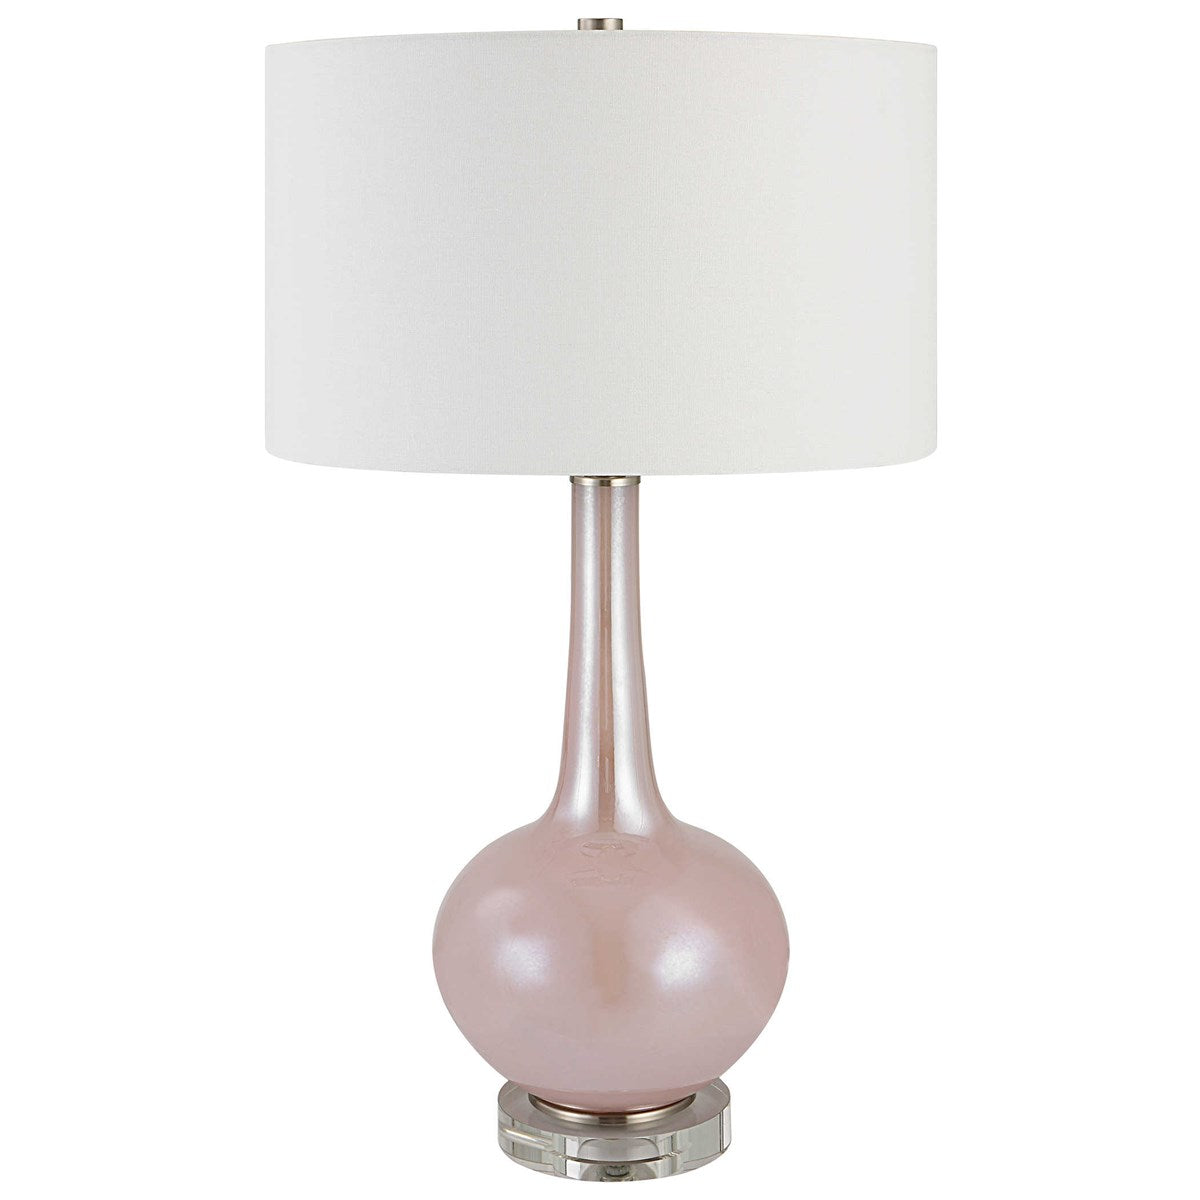 Home Gift & Rosa Lamp Table Sue – Kennedy